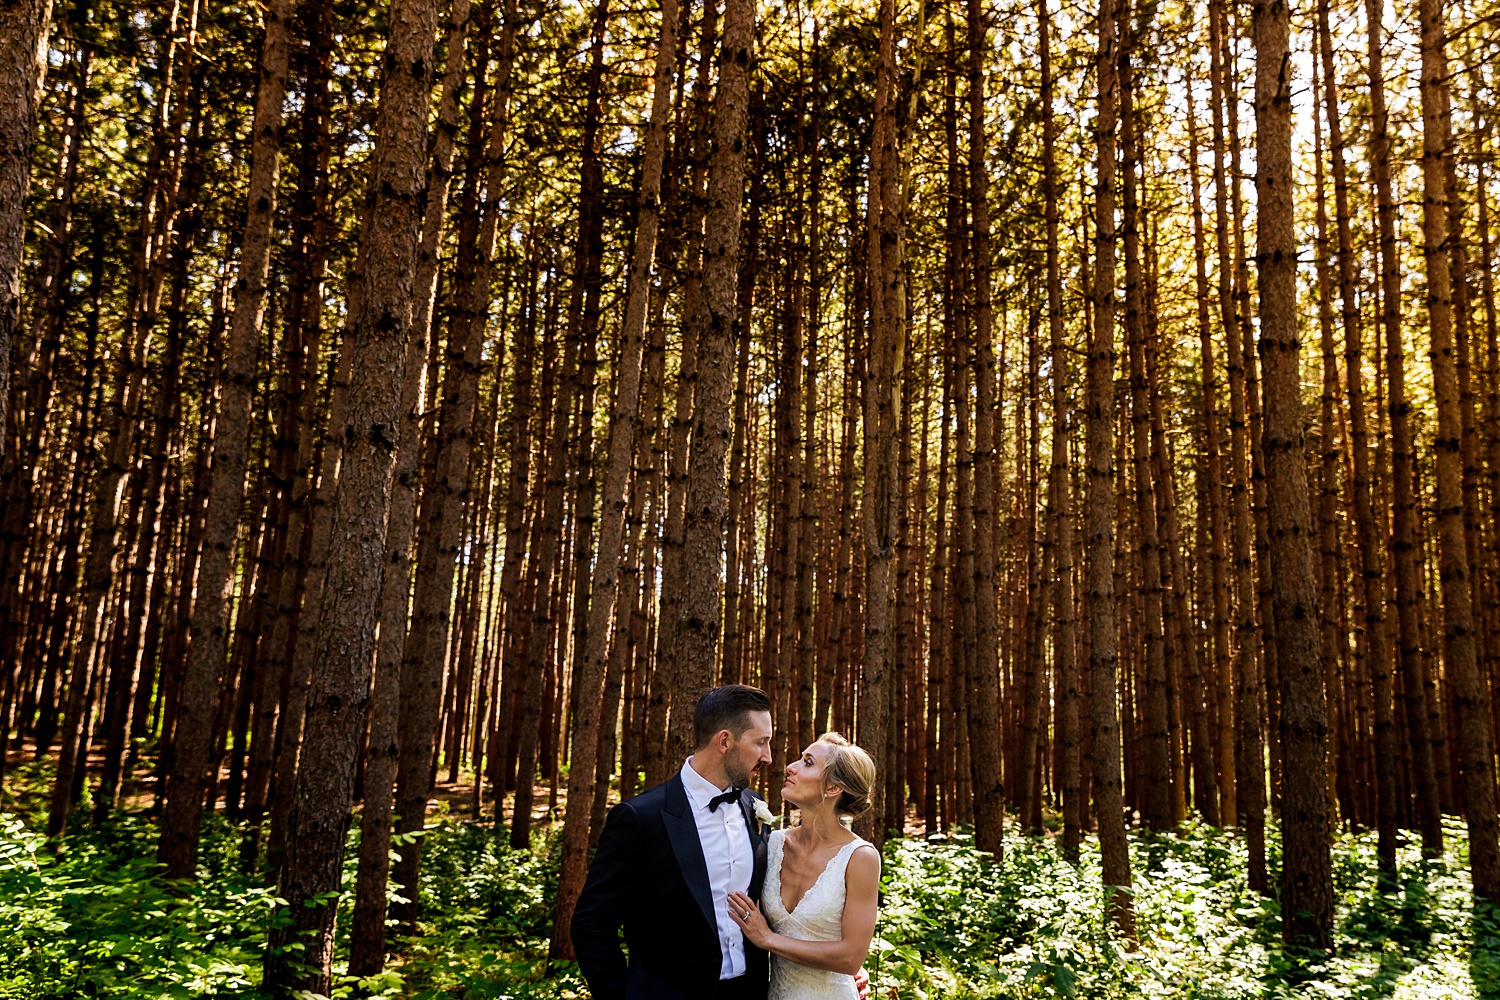 The newlyweds stand among the tall trees in the grove at Cunningham Farm in New Gloucester Maine